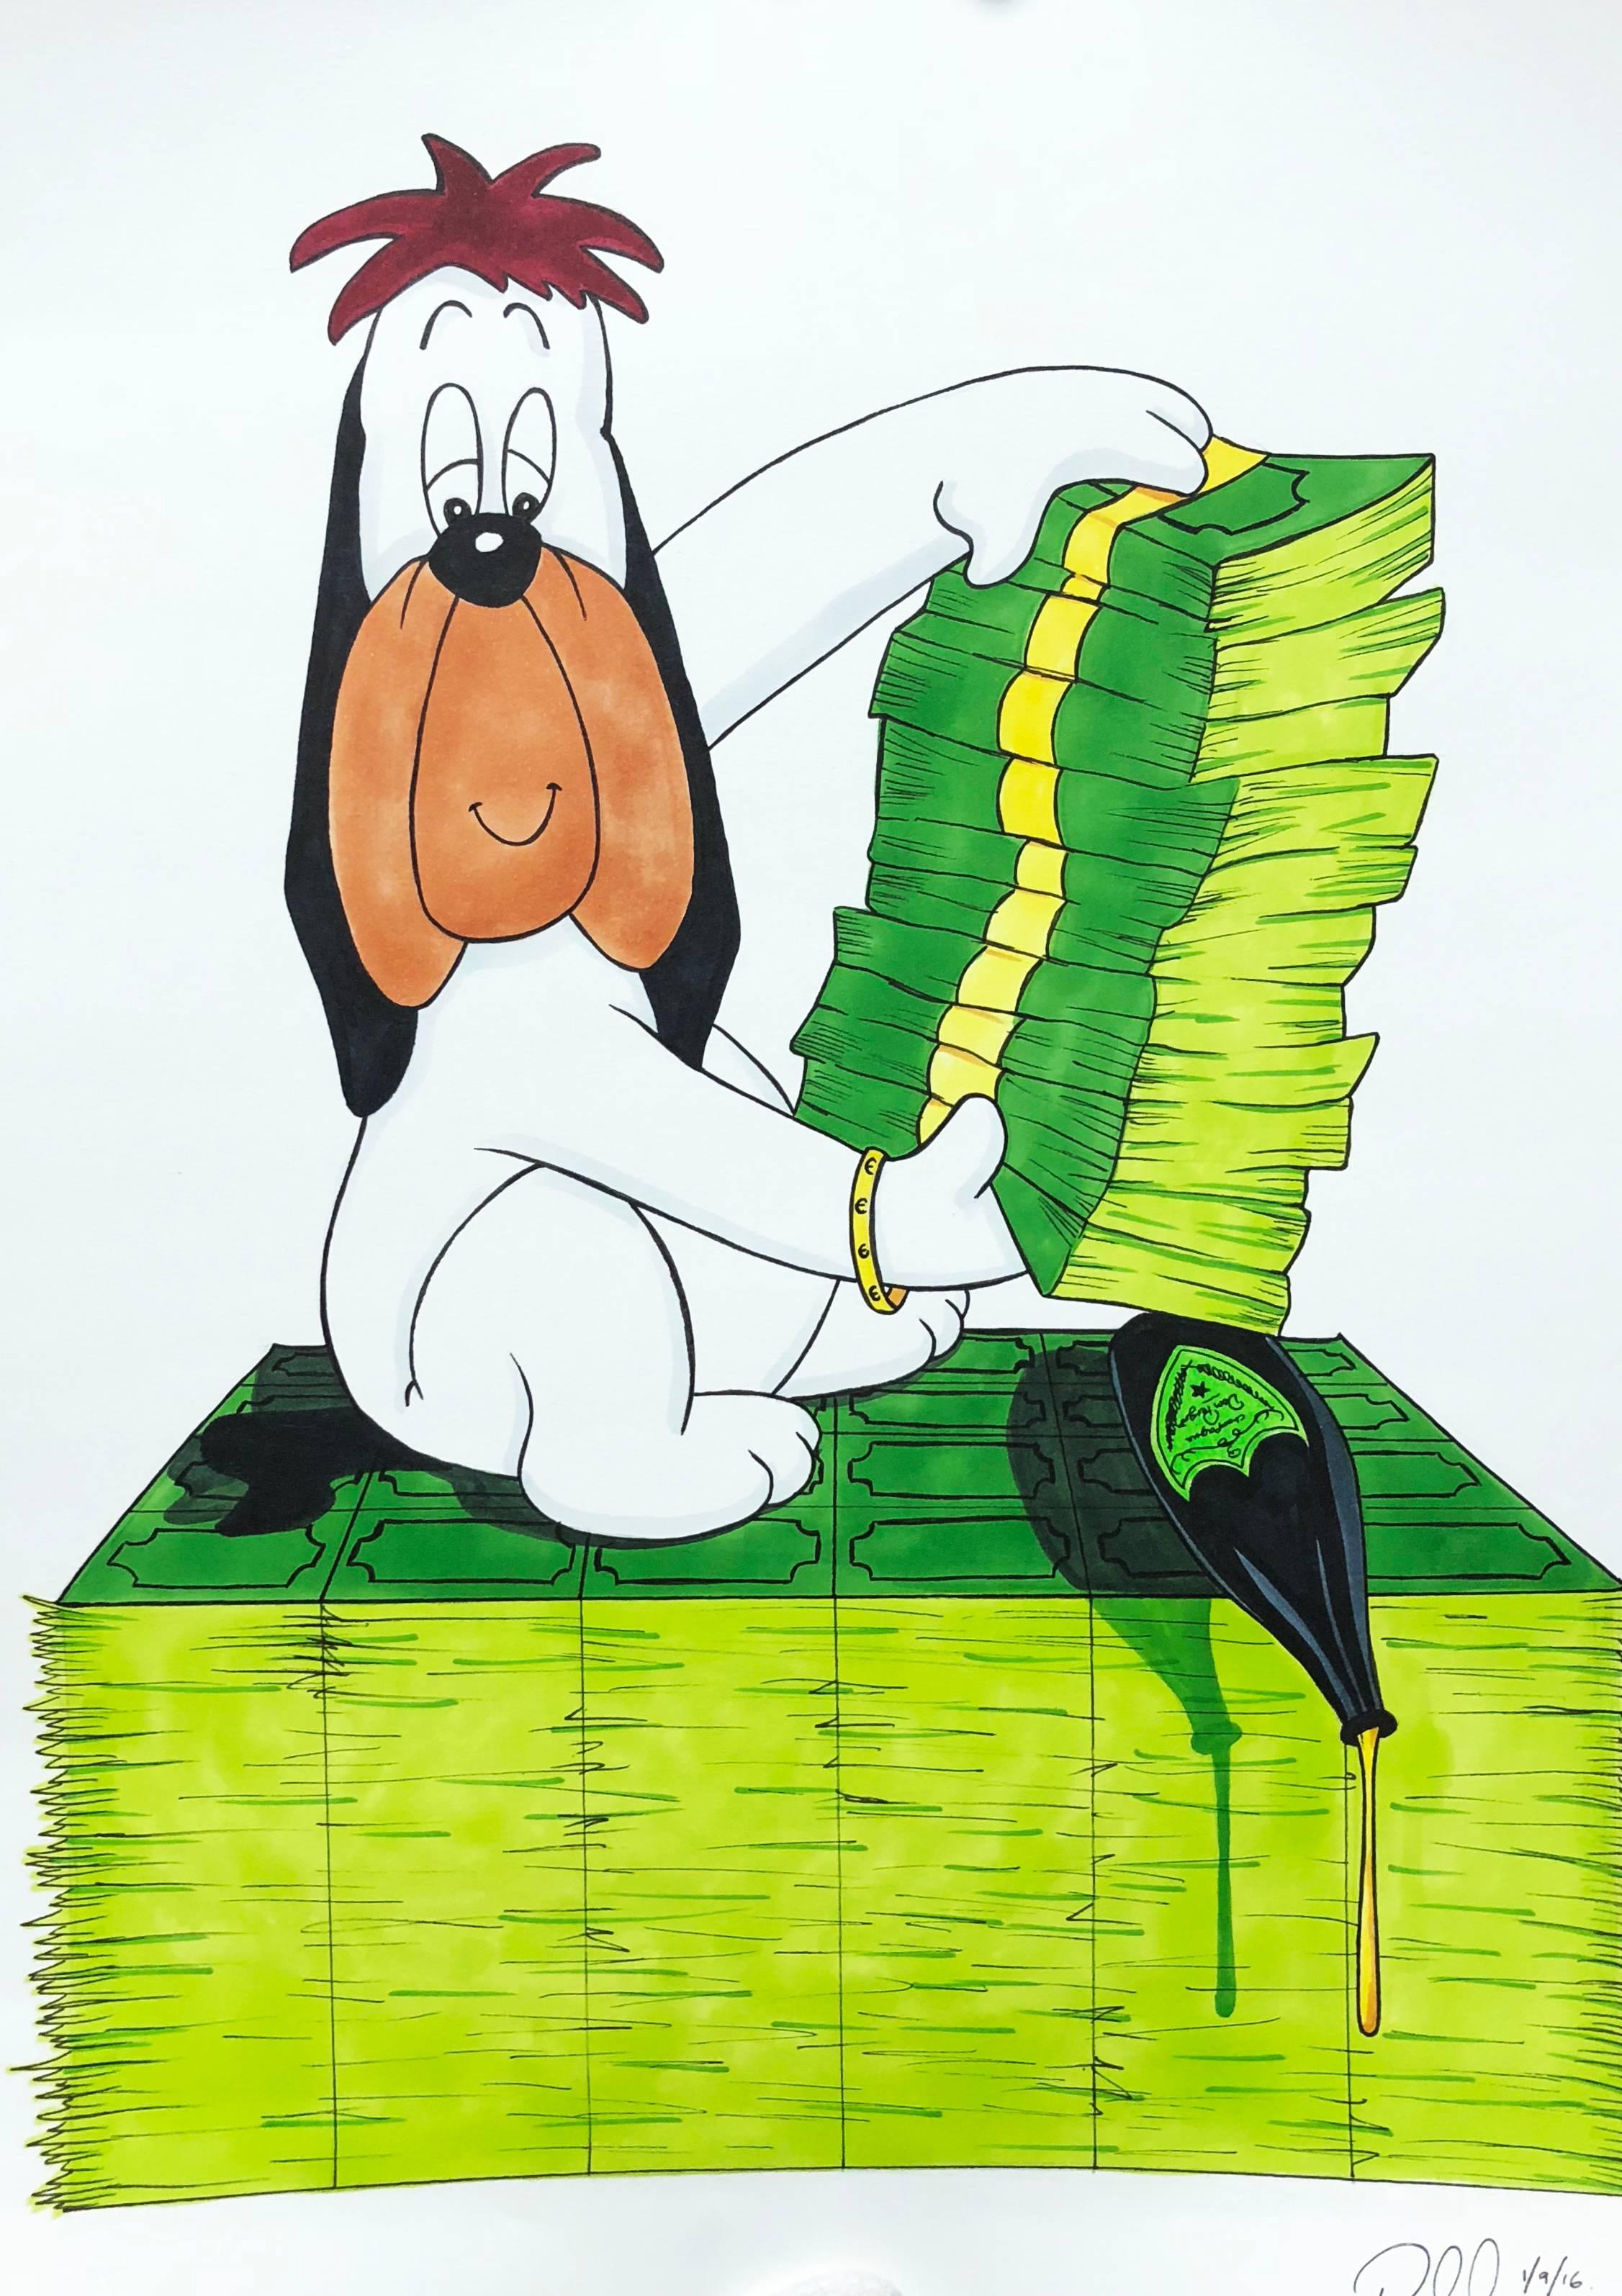 Droopy - Painting by George Rollo